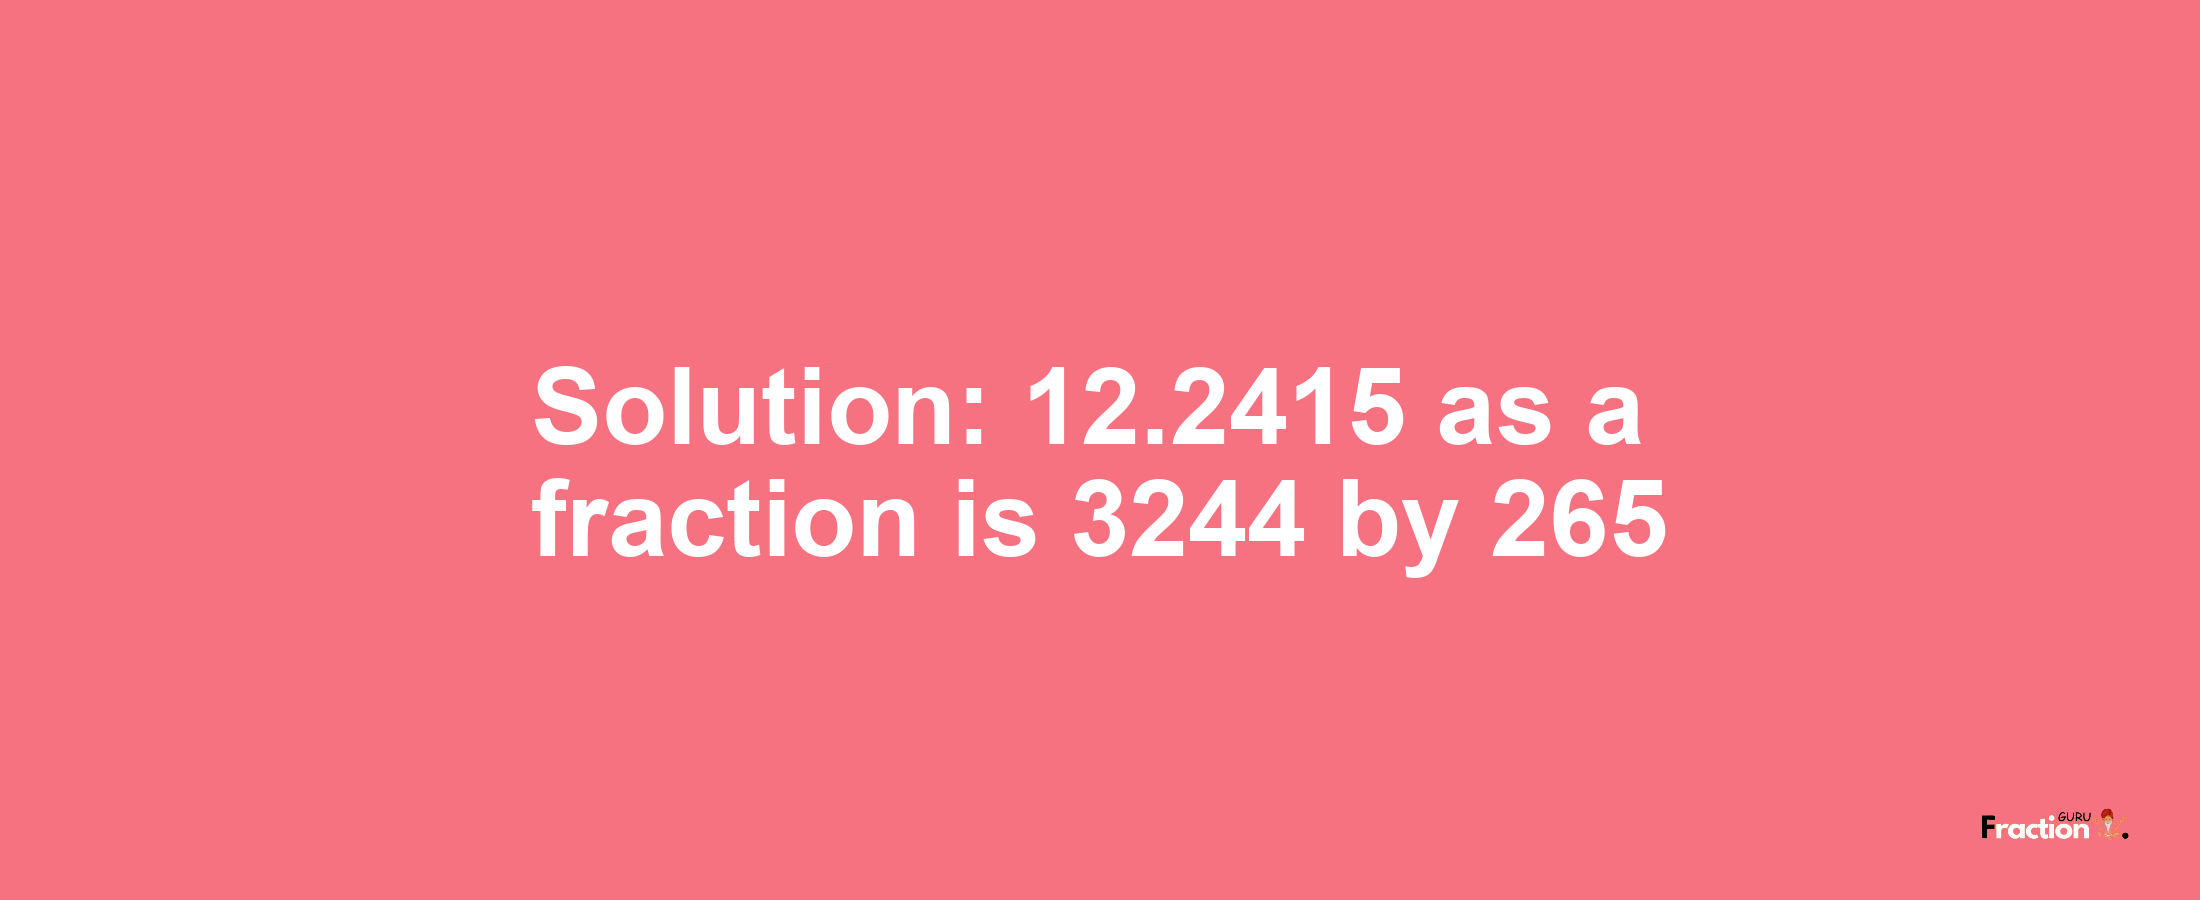 Solution:12.2415 as a fraction is 3244/265